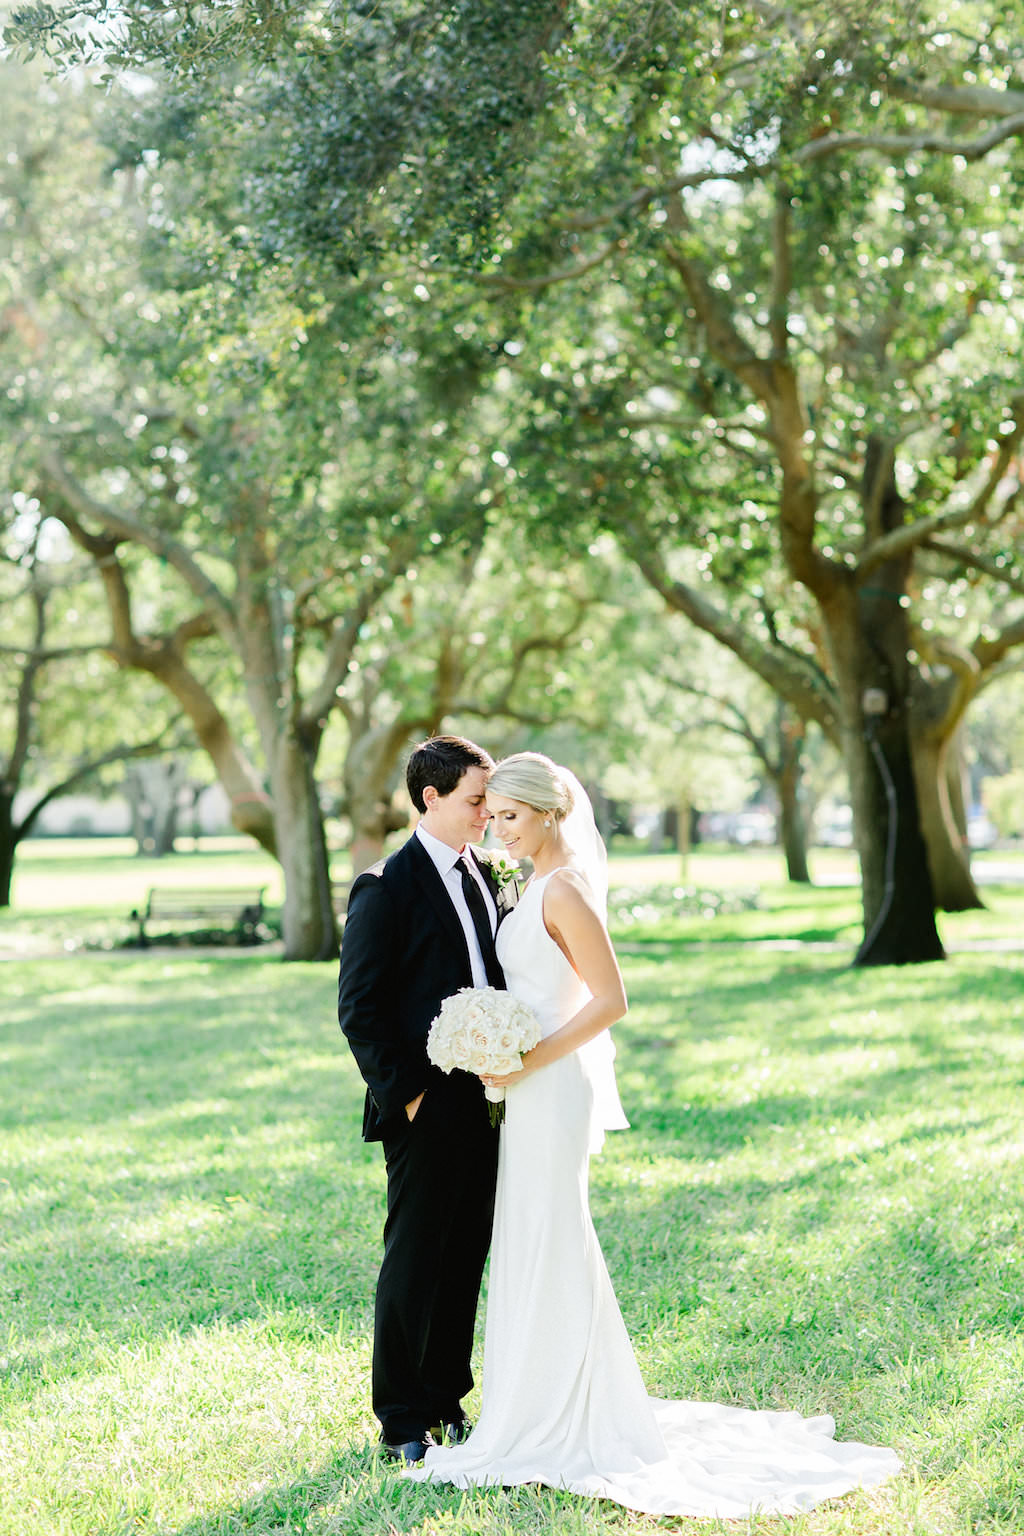 Outdoor Garden Bride and Groom Wedding Portrait, Bride with Ivory Rose Bouquet, Groom with White Rose and Greenery Bouquet | Tampa Bay Wedding Photographer Ailyn La Torre Photography | Downtown St Pete Vinoy Park